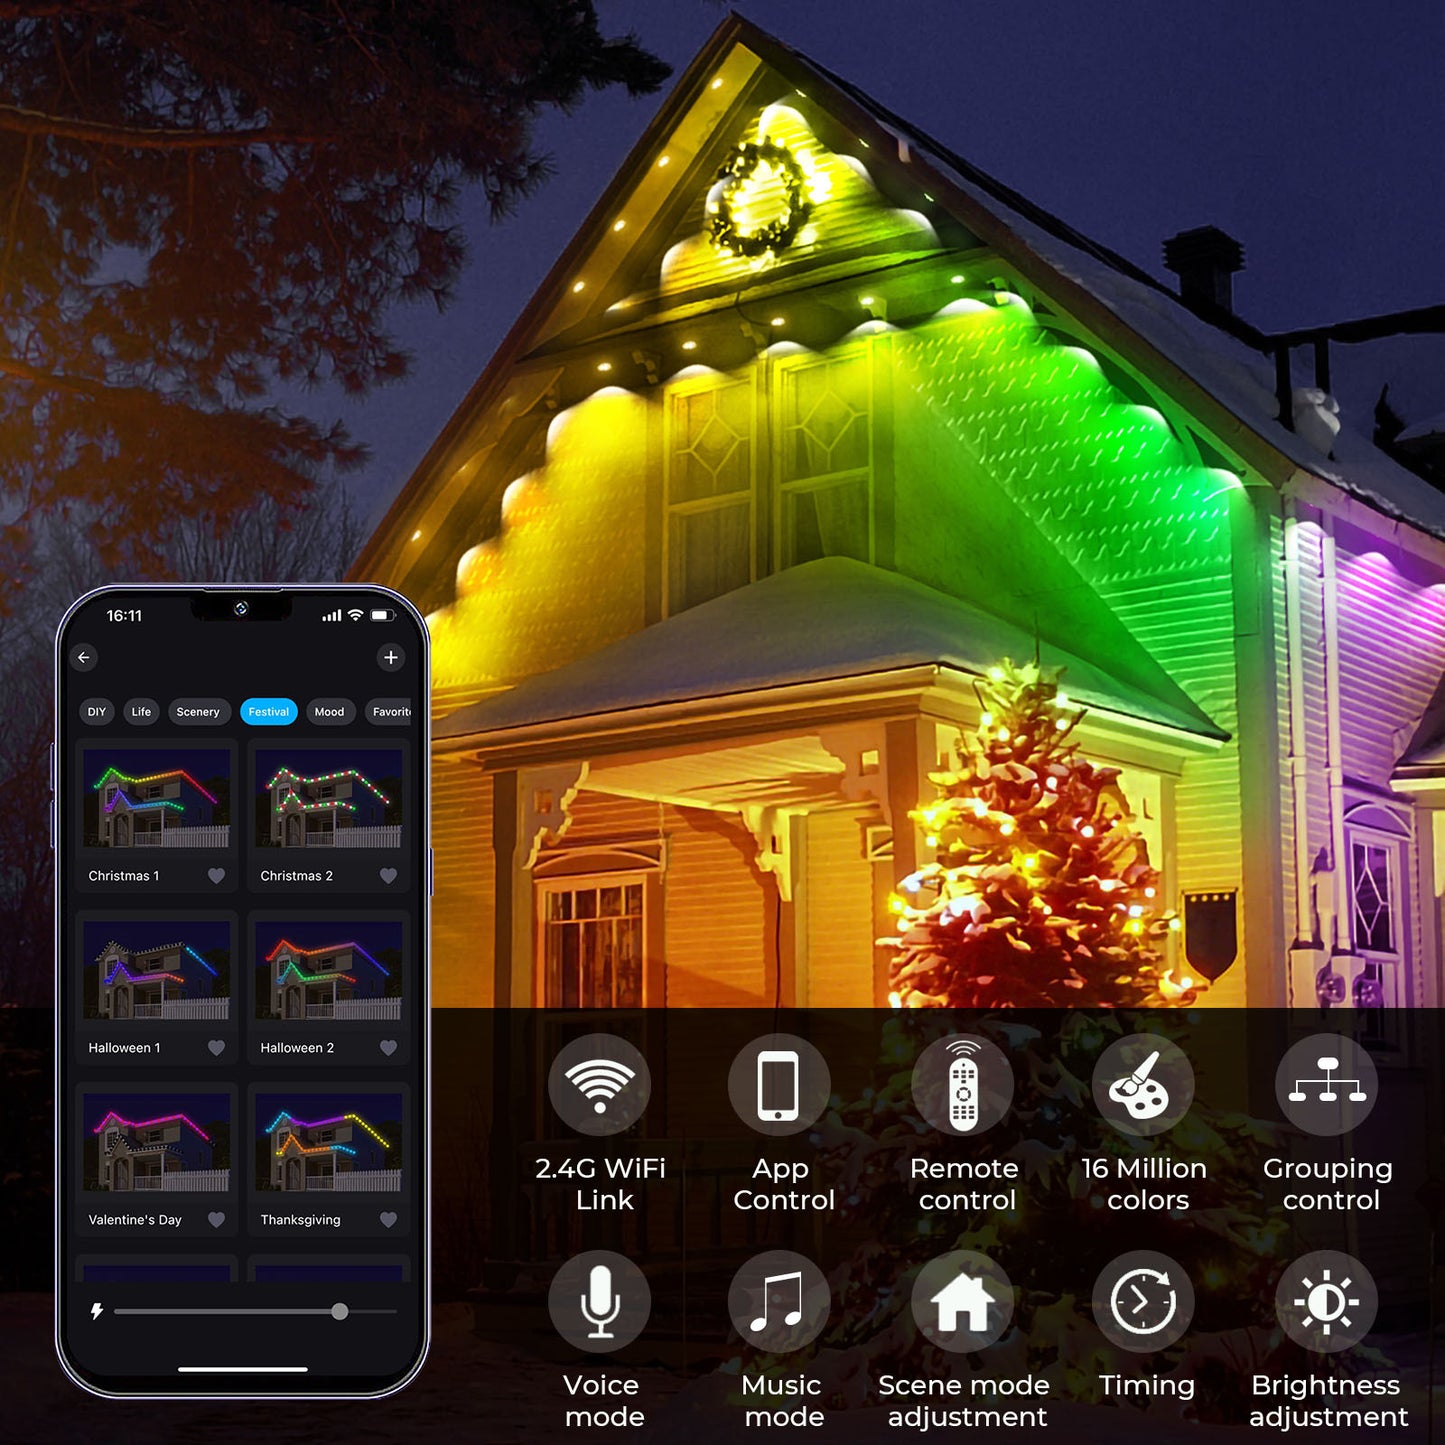 FVTLED Permanent Outdoor  String Lights, 50ft WiFi Smart Dynamic RGB+WW Multi-Color Outdoor Lights, IP65 Waterproof 36 LED Eaves Lights for Party, Christmas Day, Game Day, Daily Lighting